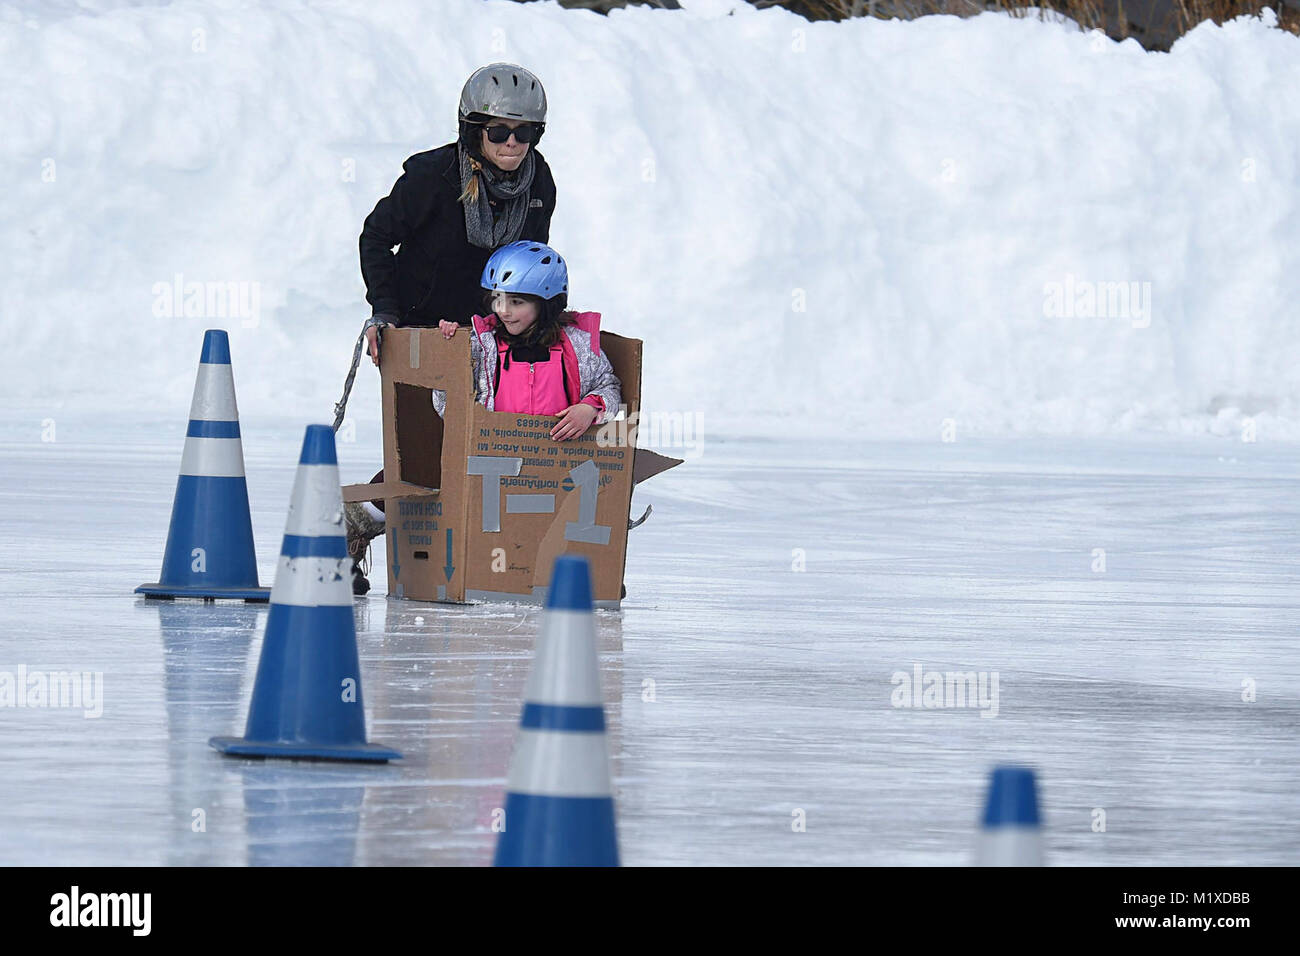 Jessica Pickett, Buckley Air Force Base spouse, and Anya Fournier, 9, slide in-between cones during the cardboard derby at the annual SnoFest at Copper Mountain, Colorado, Jan. 20, 2018. Participants had the option to bring their own cardboard creation or construct one with provided boxes for the event. (U.S. Air Force Stock Photo